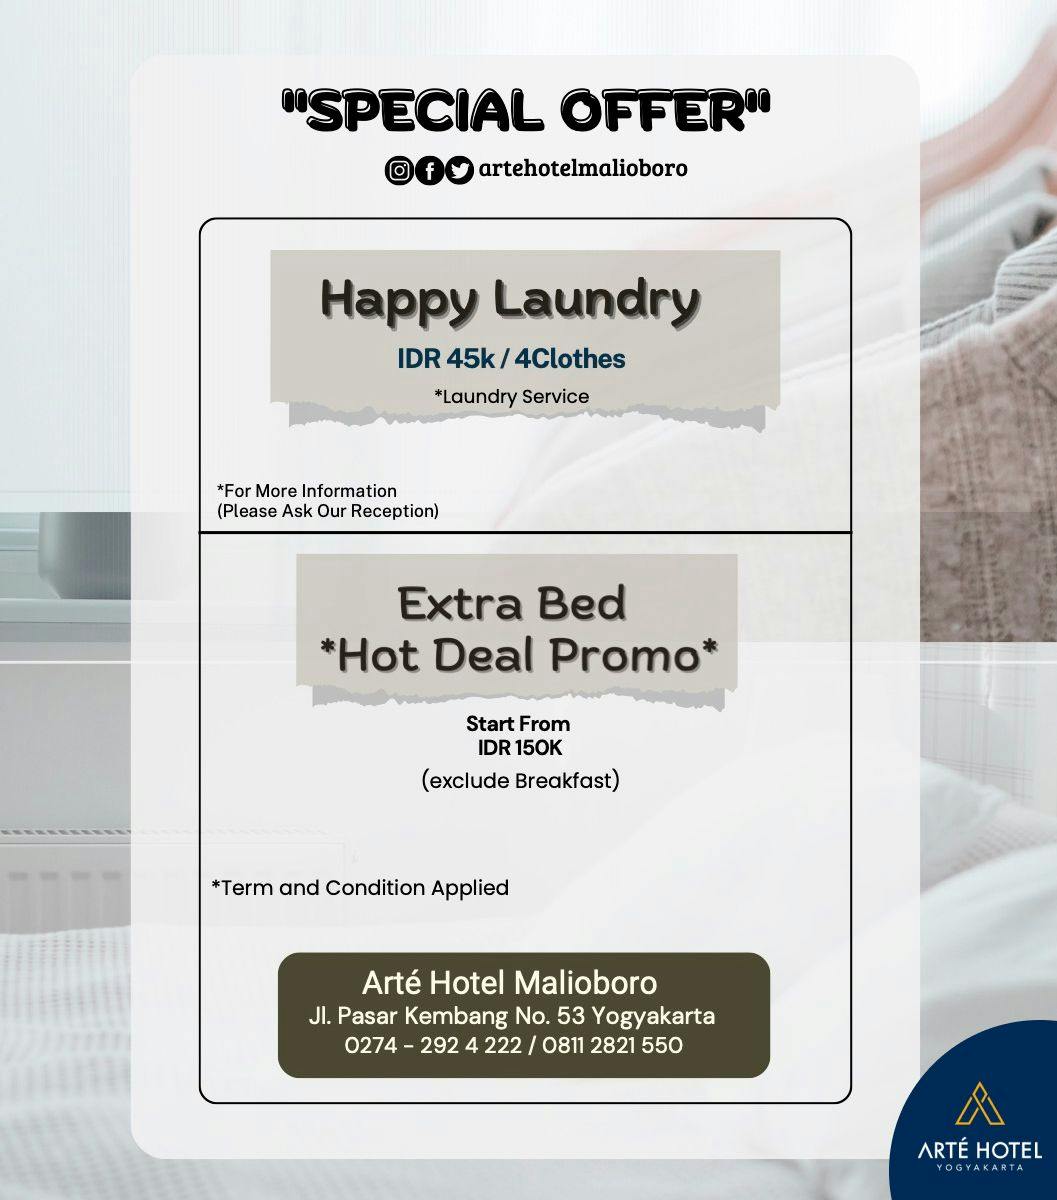  LAUNDRY & EXTRA BED SPECIAL OFFER